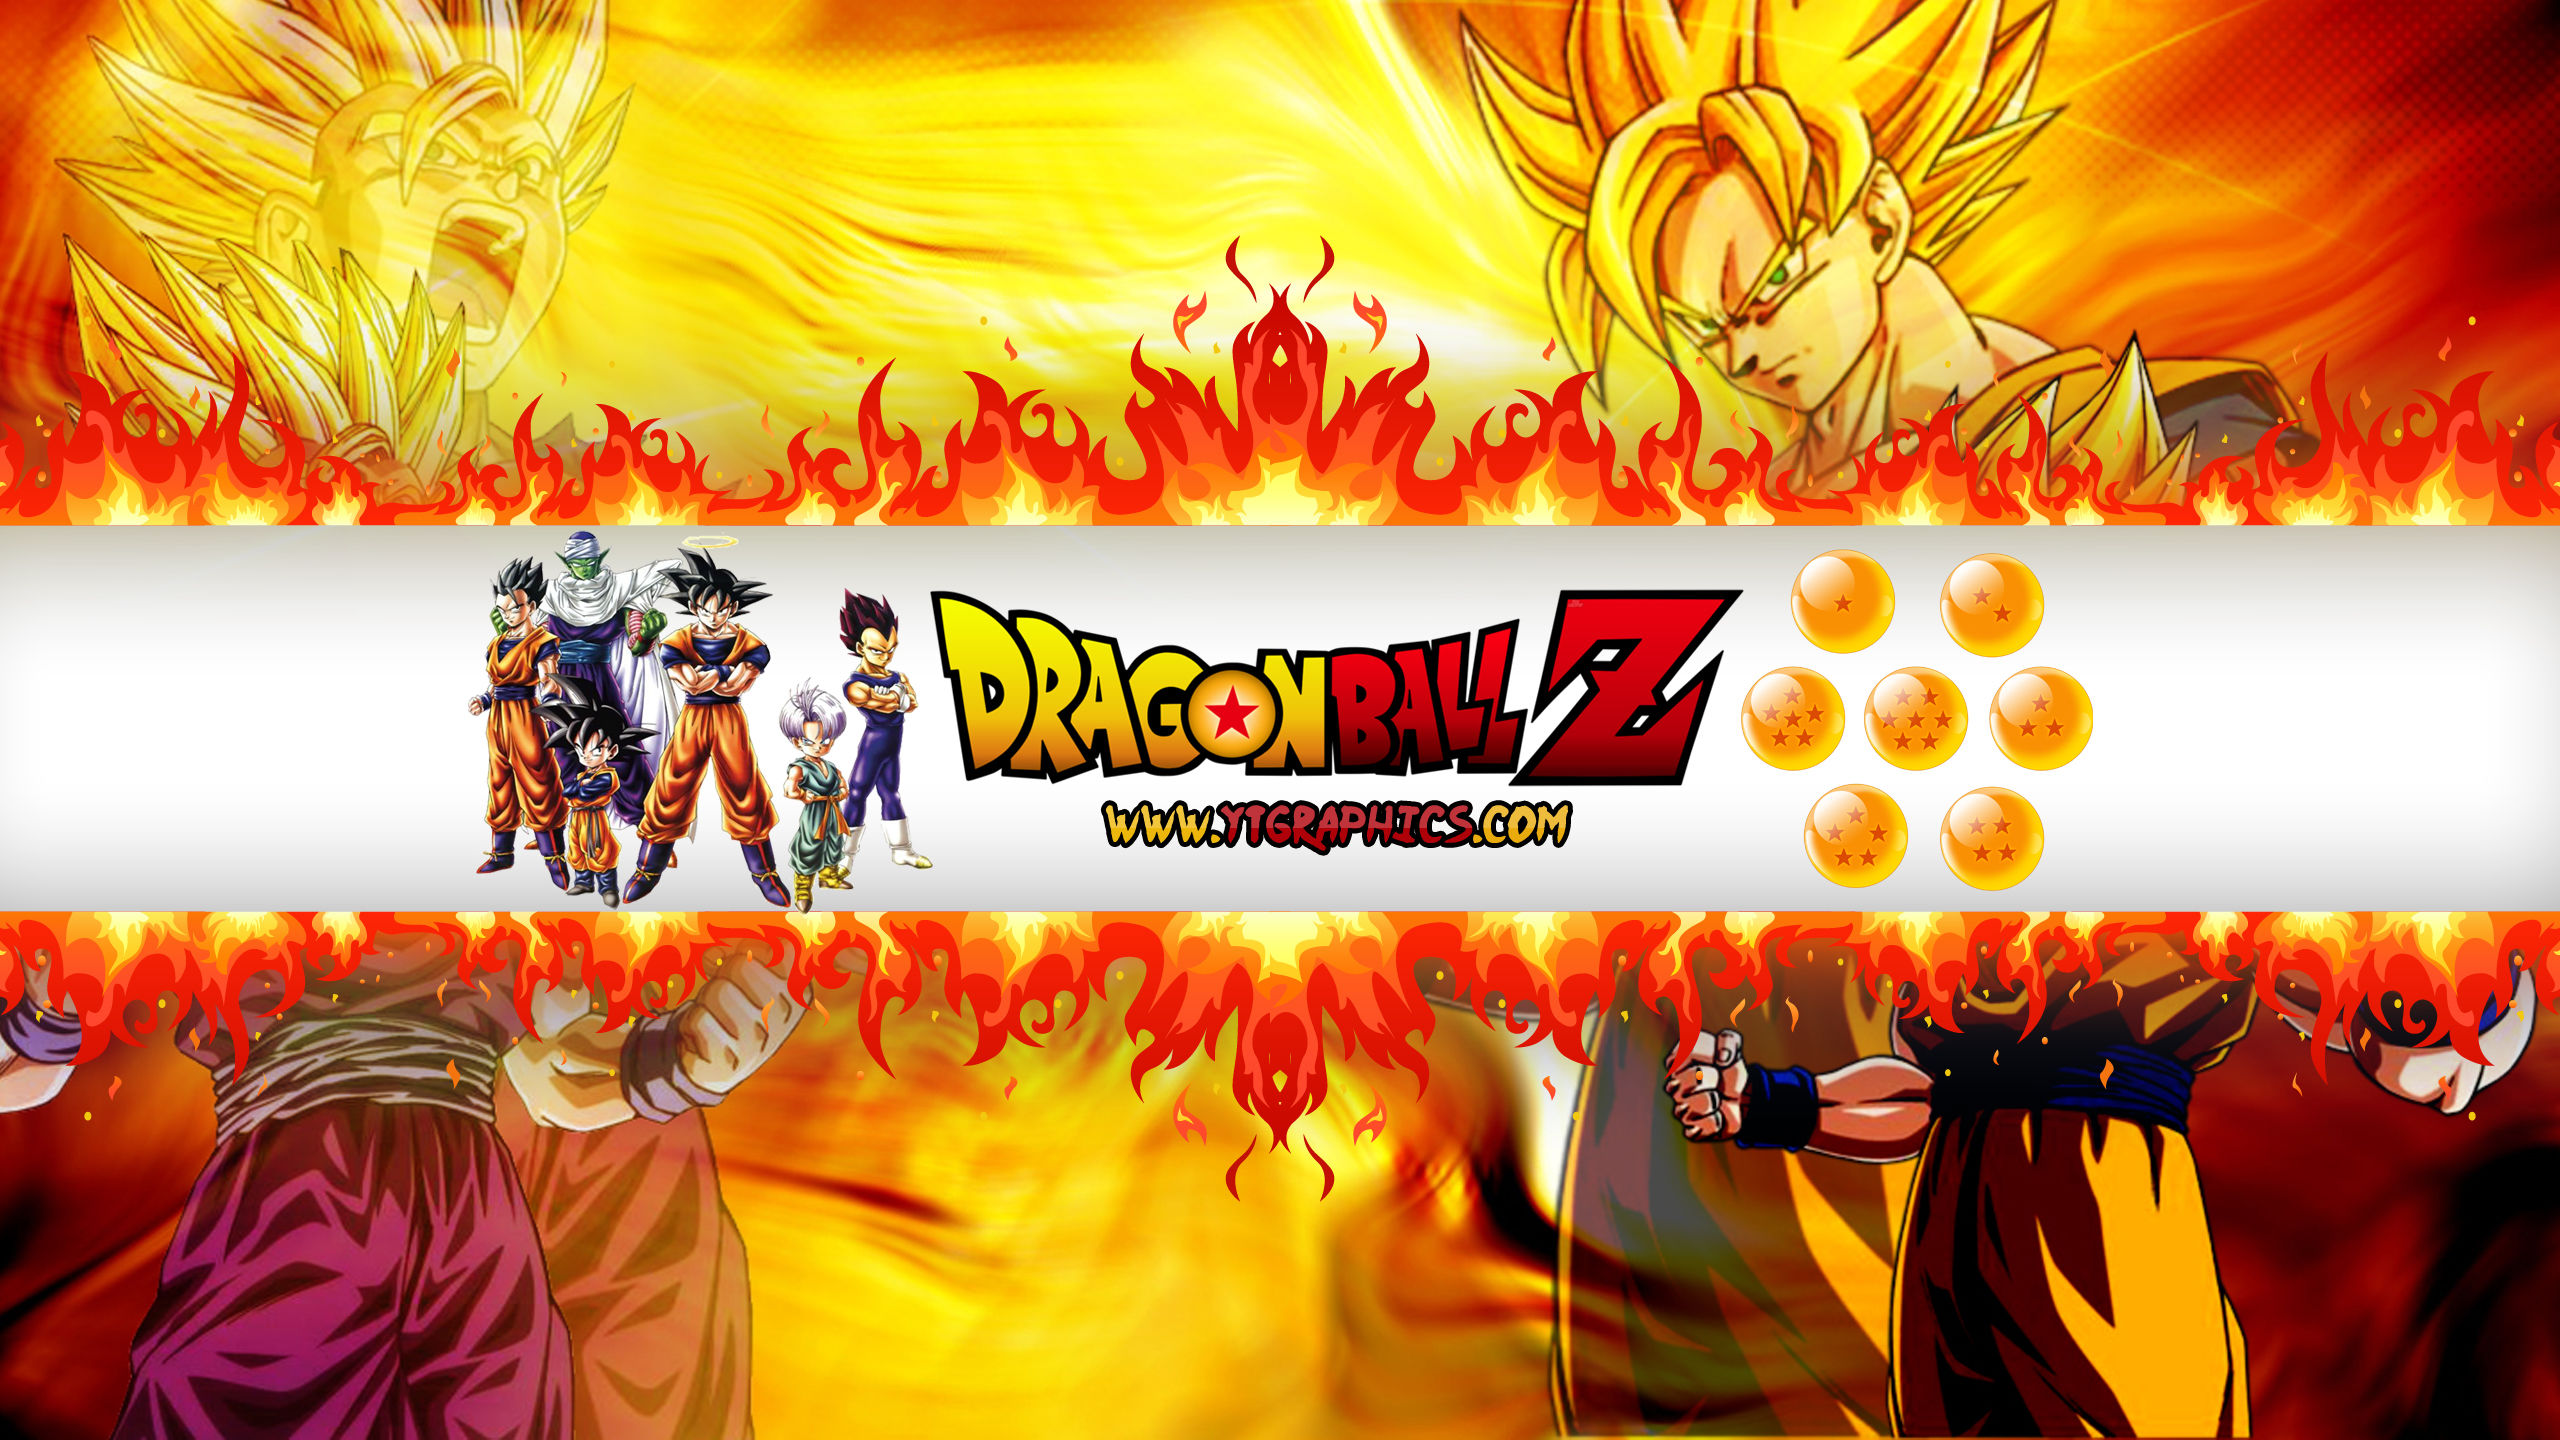 Dragon Ball Z Youtube Channel Art Banner - roblox how to make a dragon ball z game